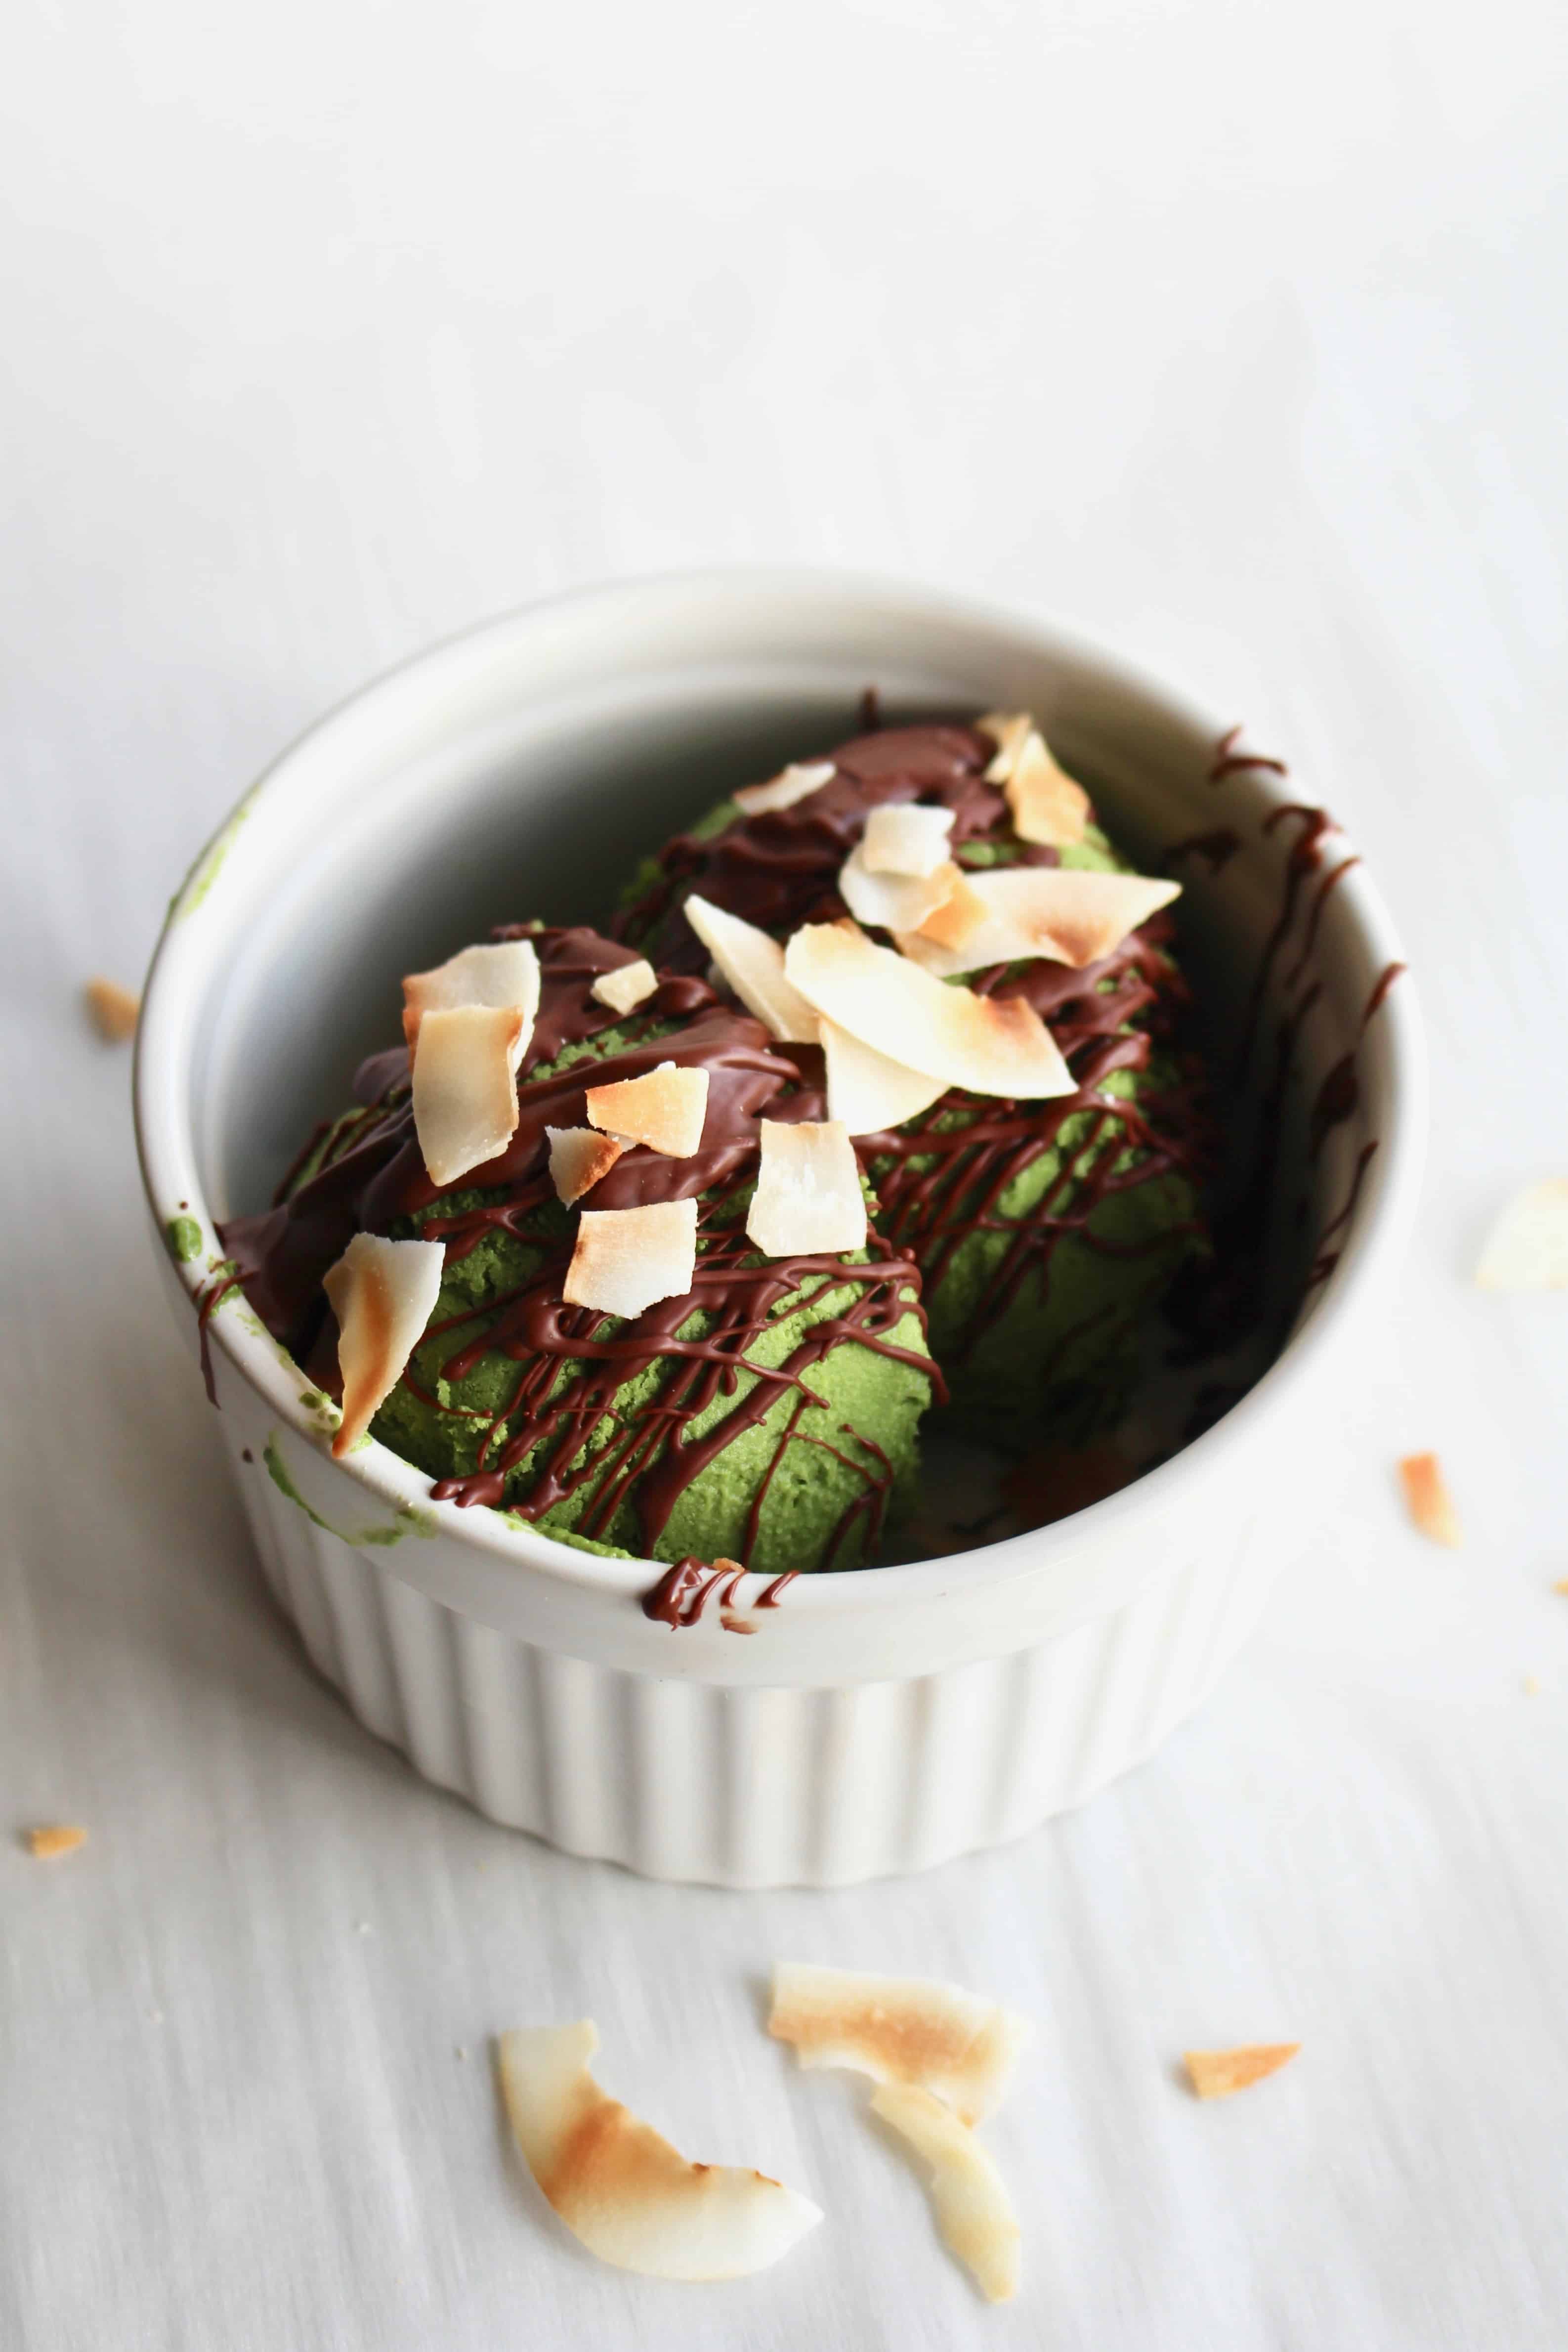 Chocolate and coconut flakes on green ice cream